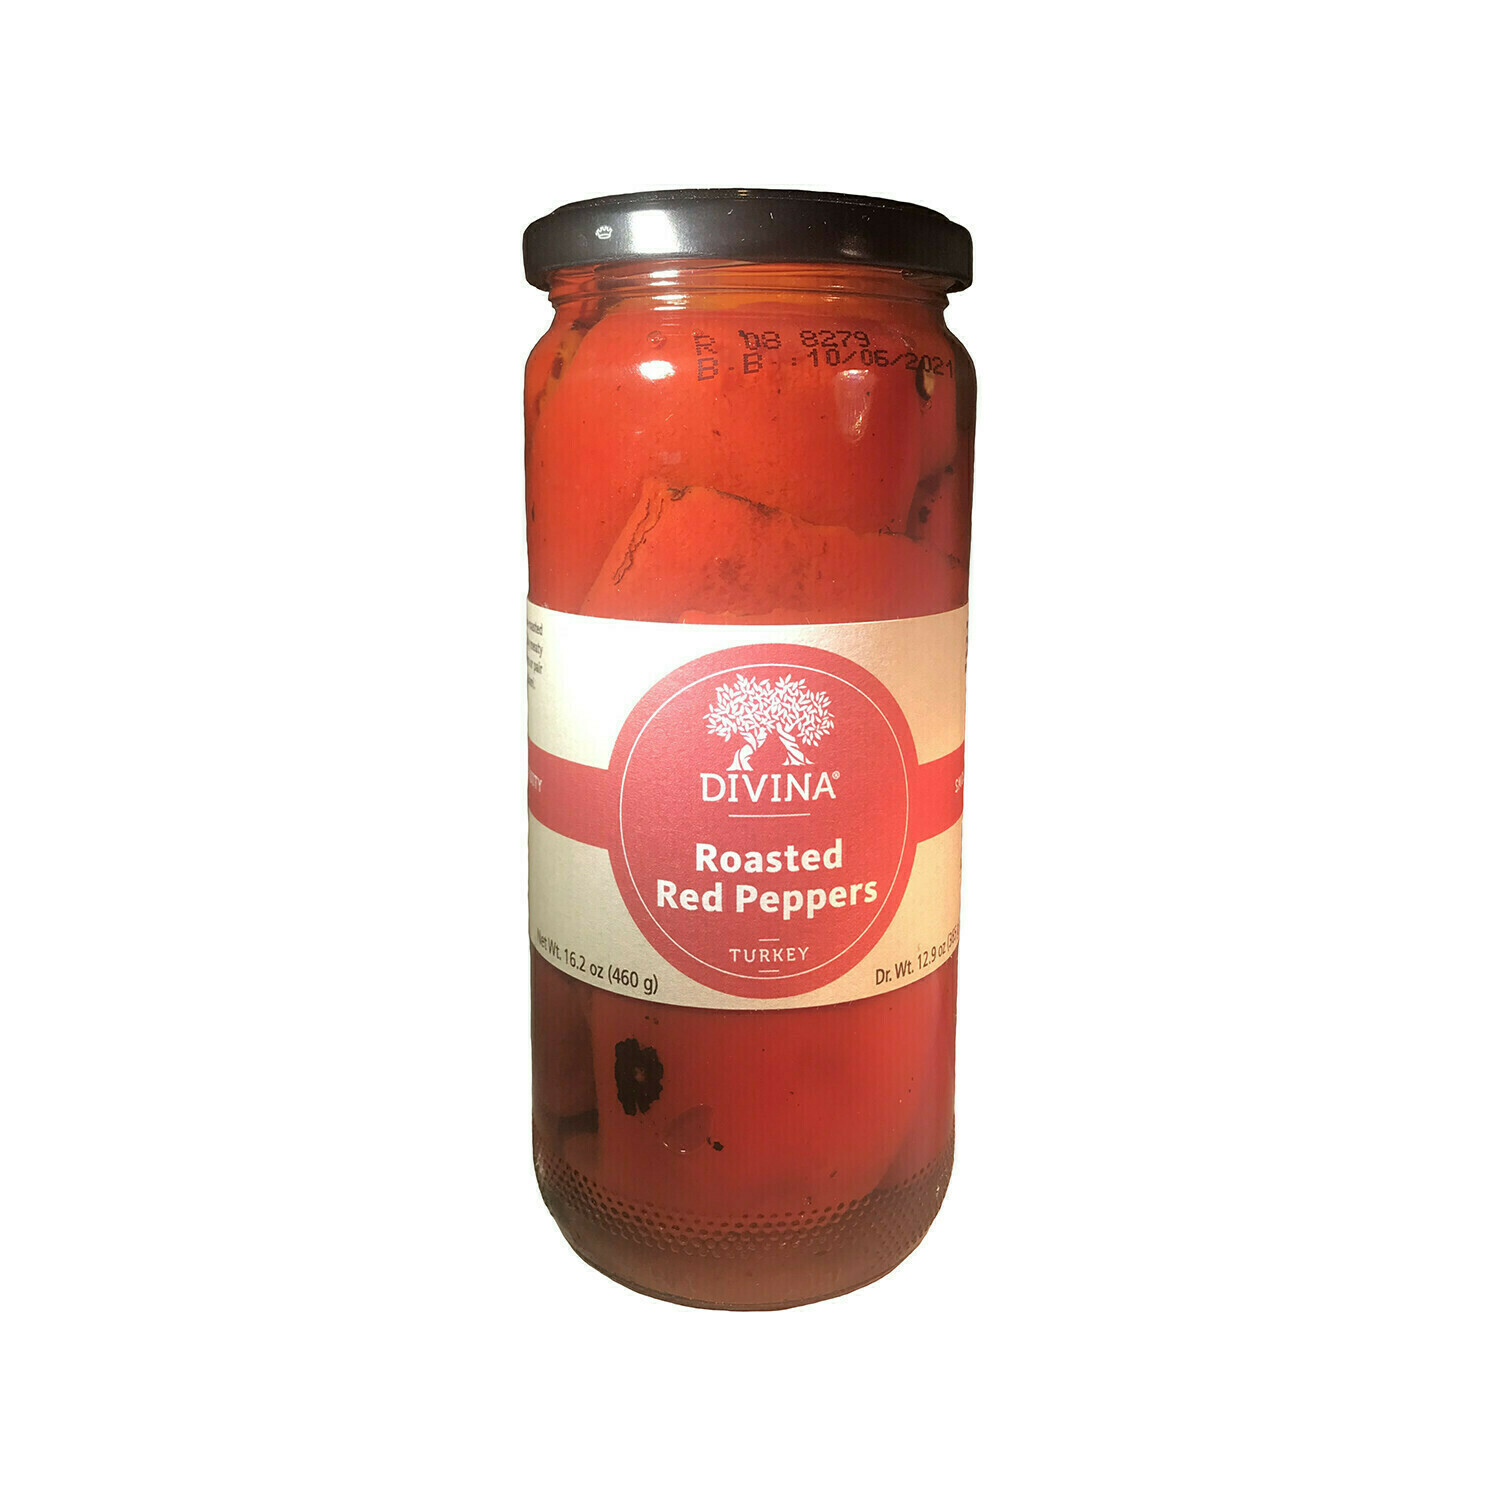 Divina Roasted Red Peppers 12.9oz Turkey